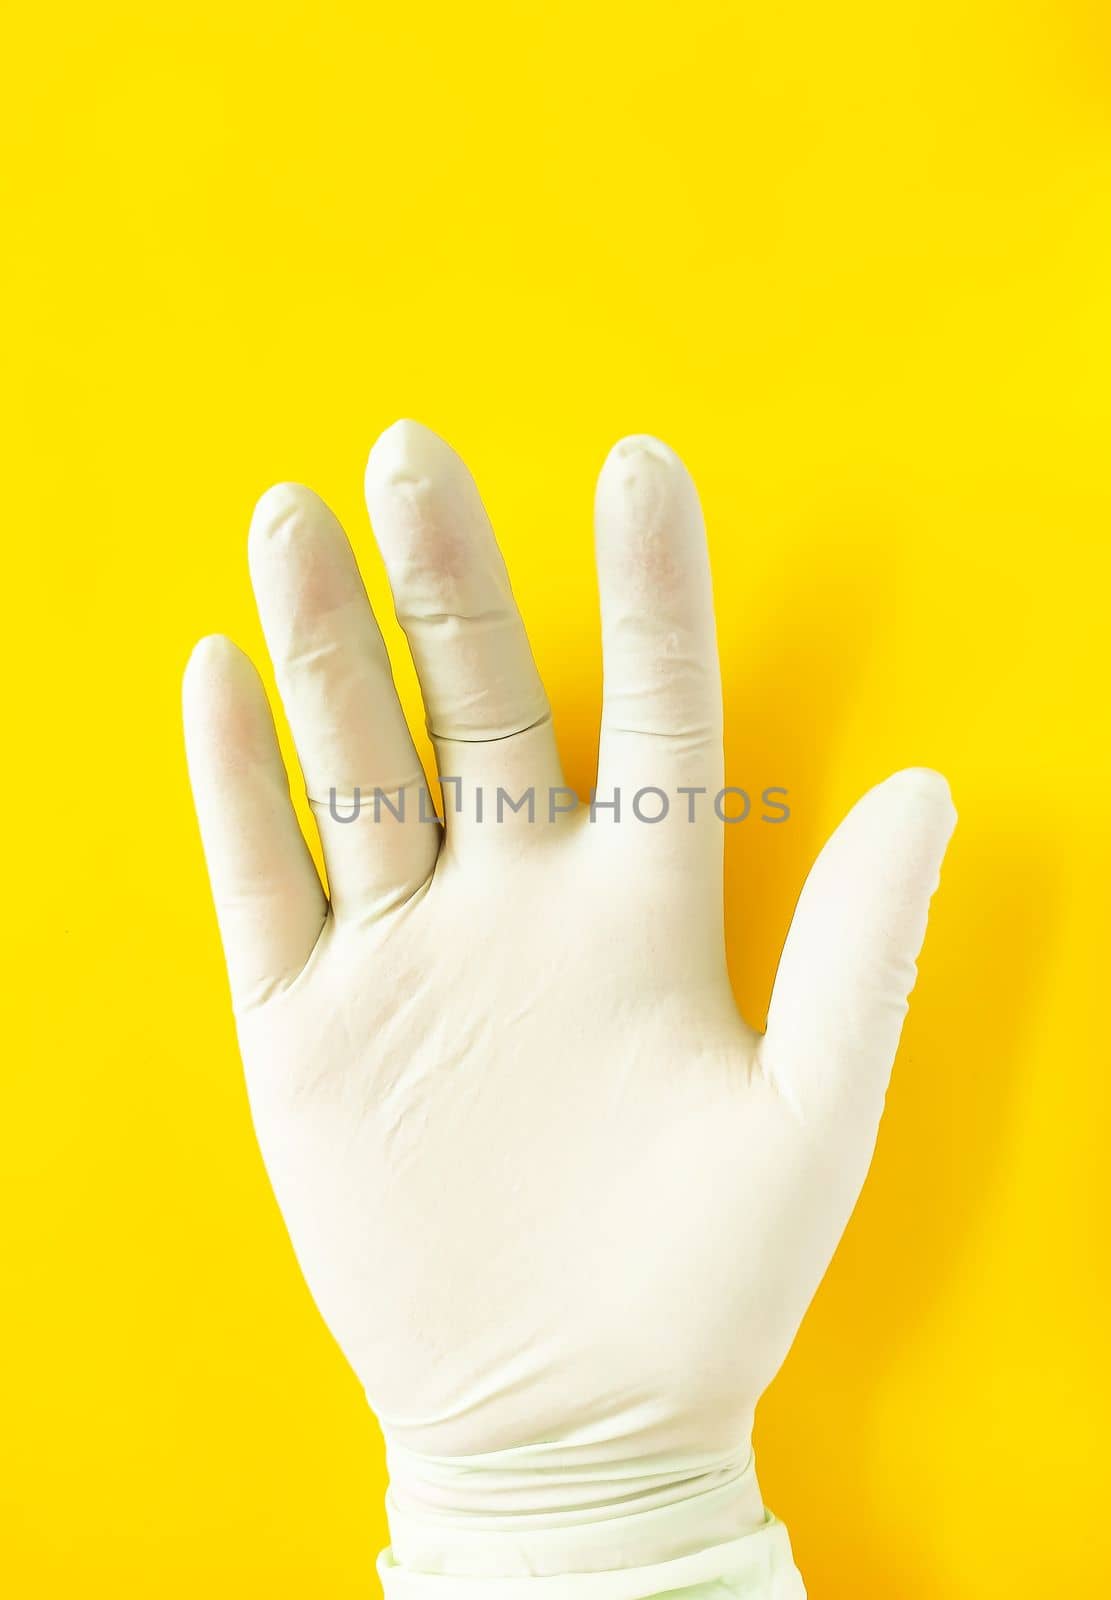 A hand in rubber glove on bright yellow background